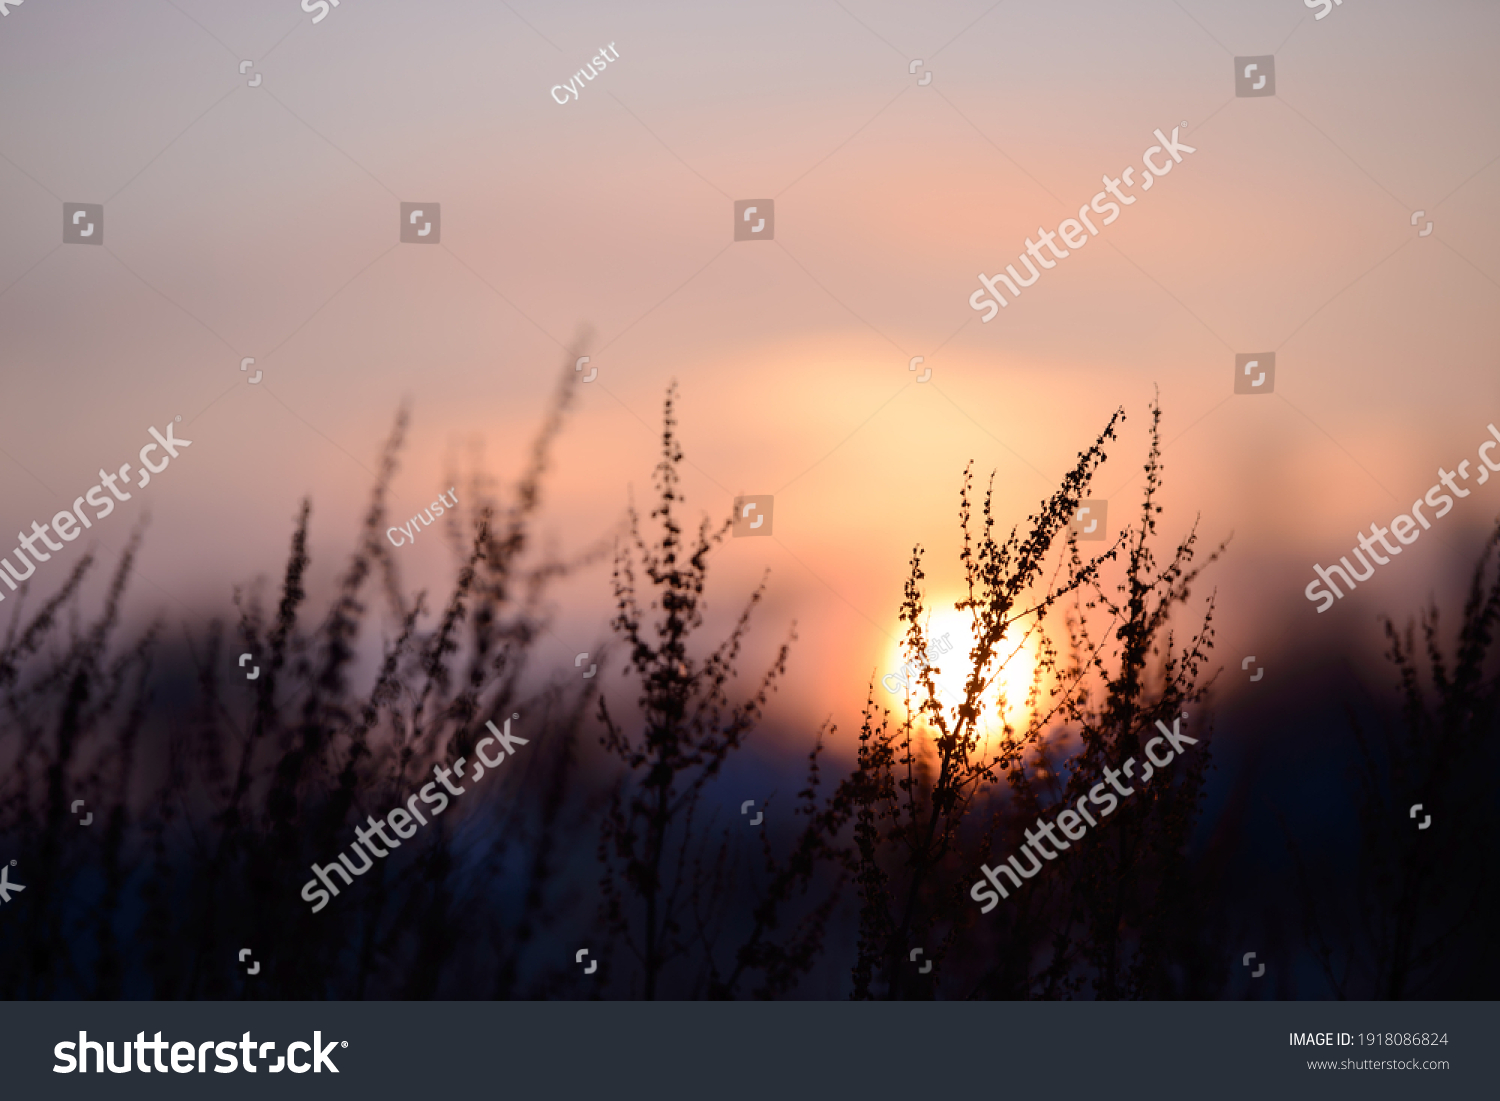 Colorful nature sunset or sunrise background. Silhouette of tree or grass branches and leaves on the field during dusk. Twilight beautiful scenic landscape wallpaper. Natural evening backdrop. #1918086824